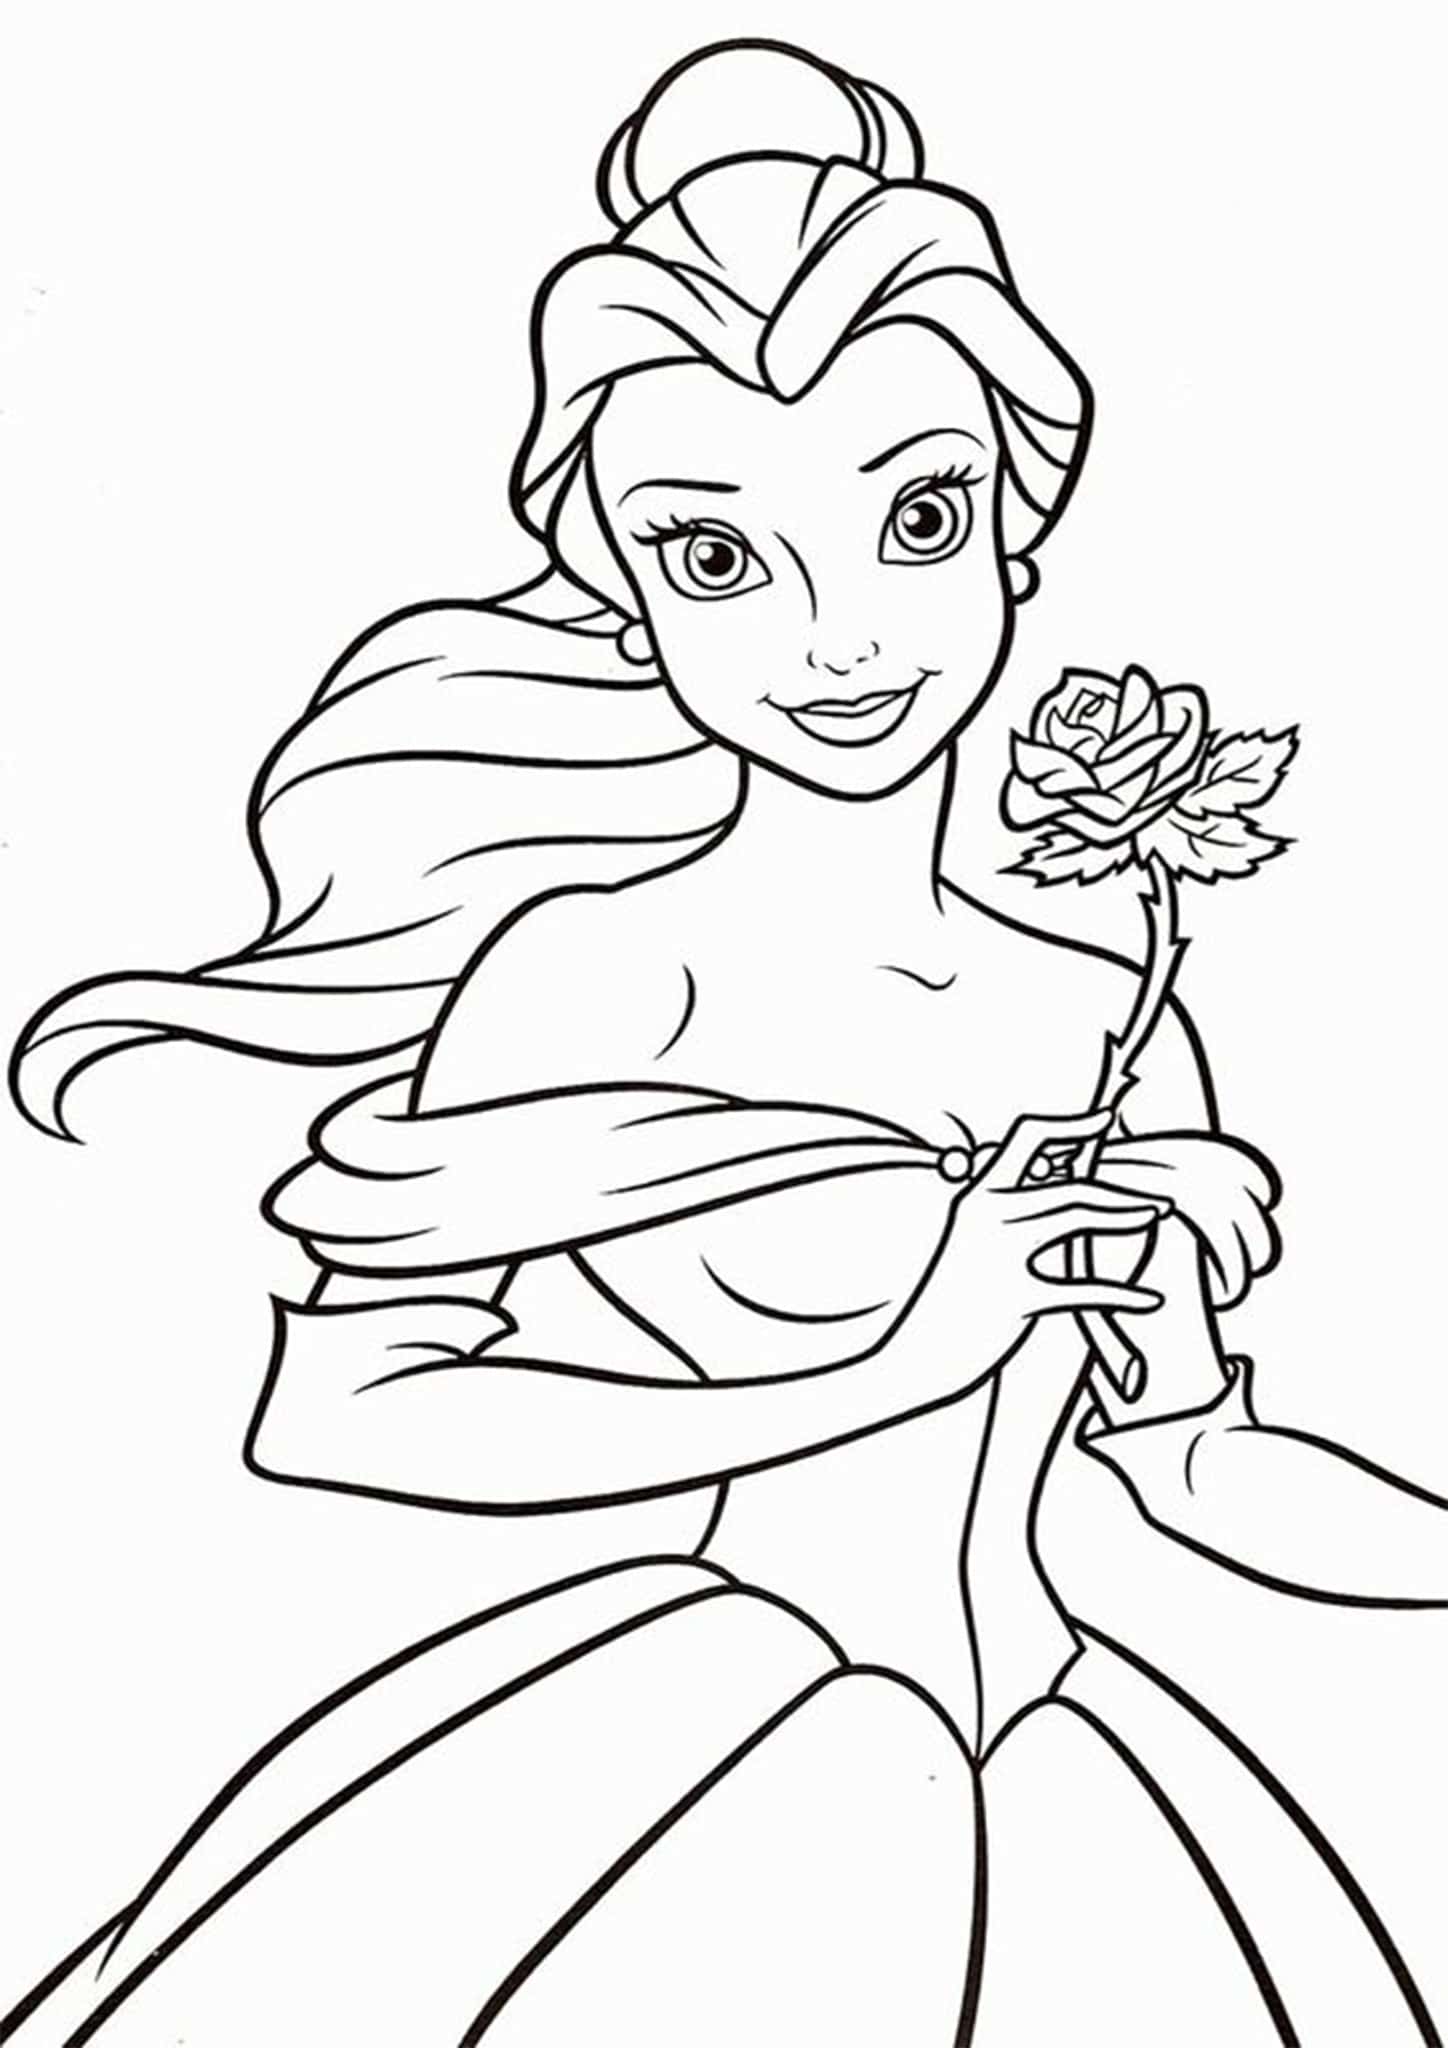 Download Free & Easy To Print Beauty and The Beast Coloring Pages ...